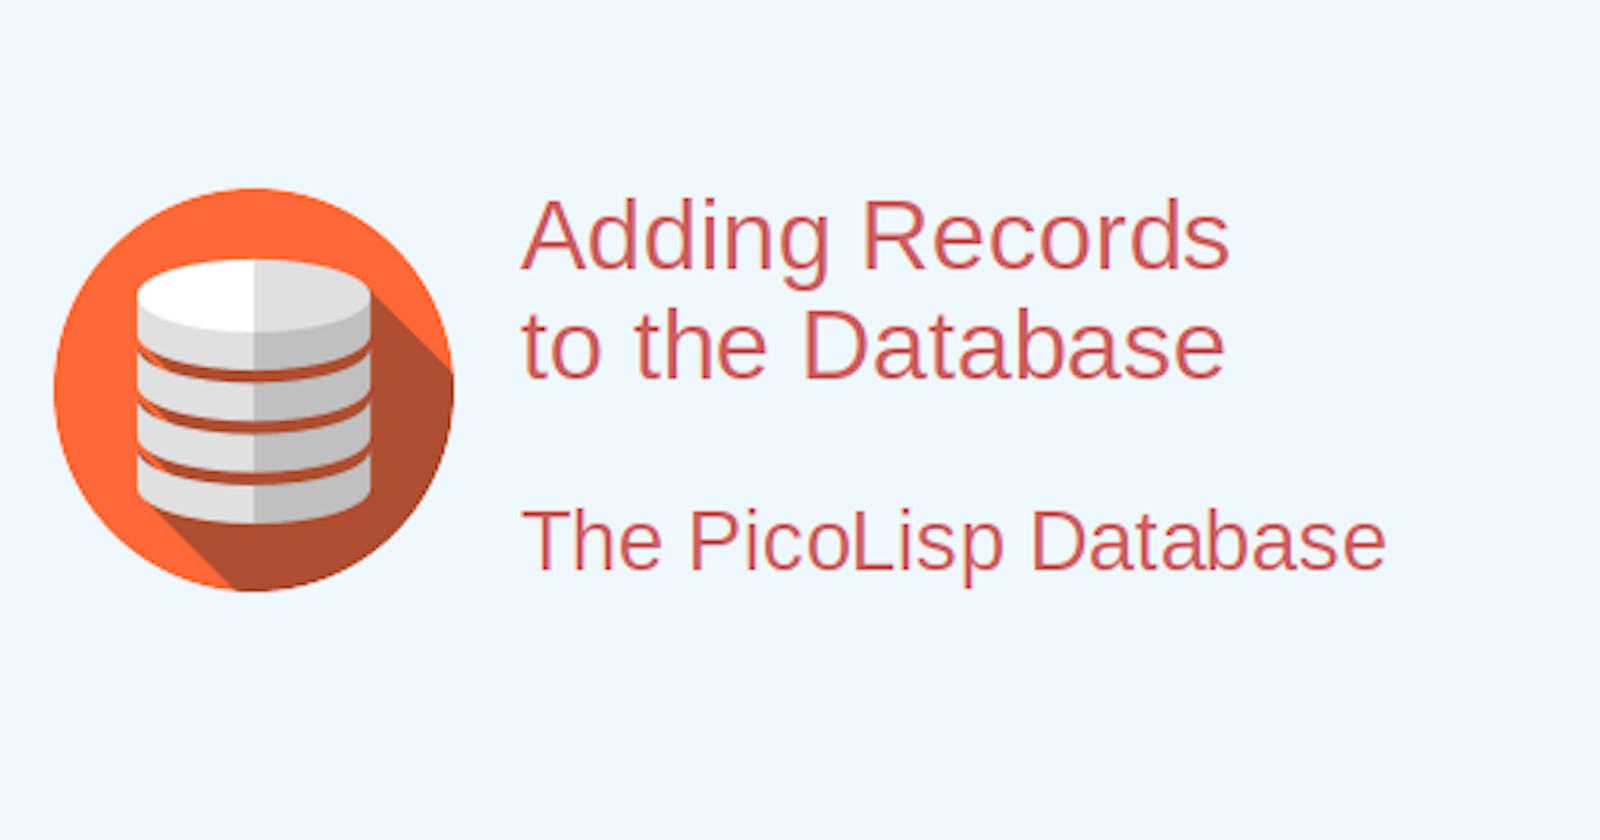 How to Add Records to the PicoLisp Database